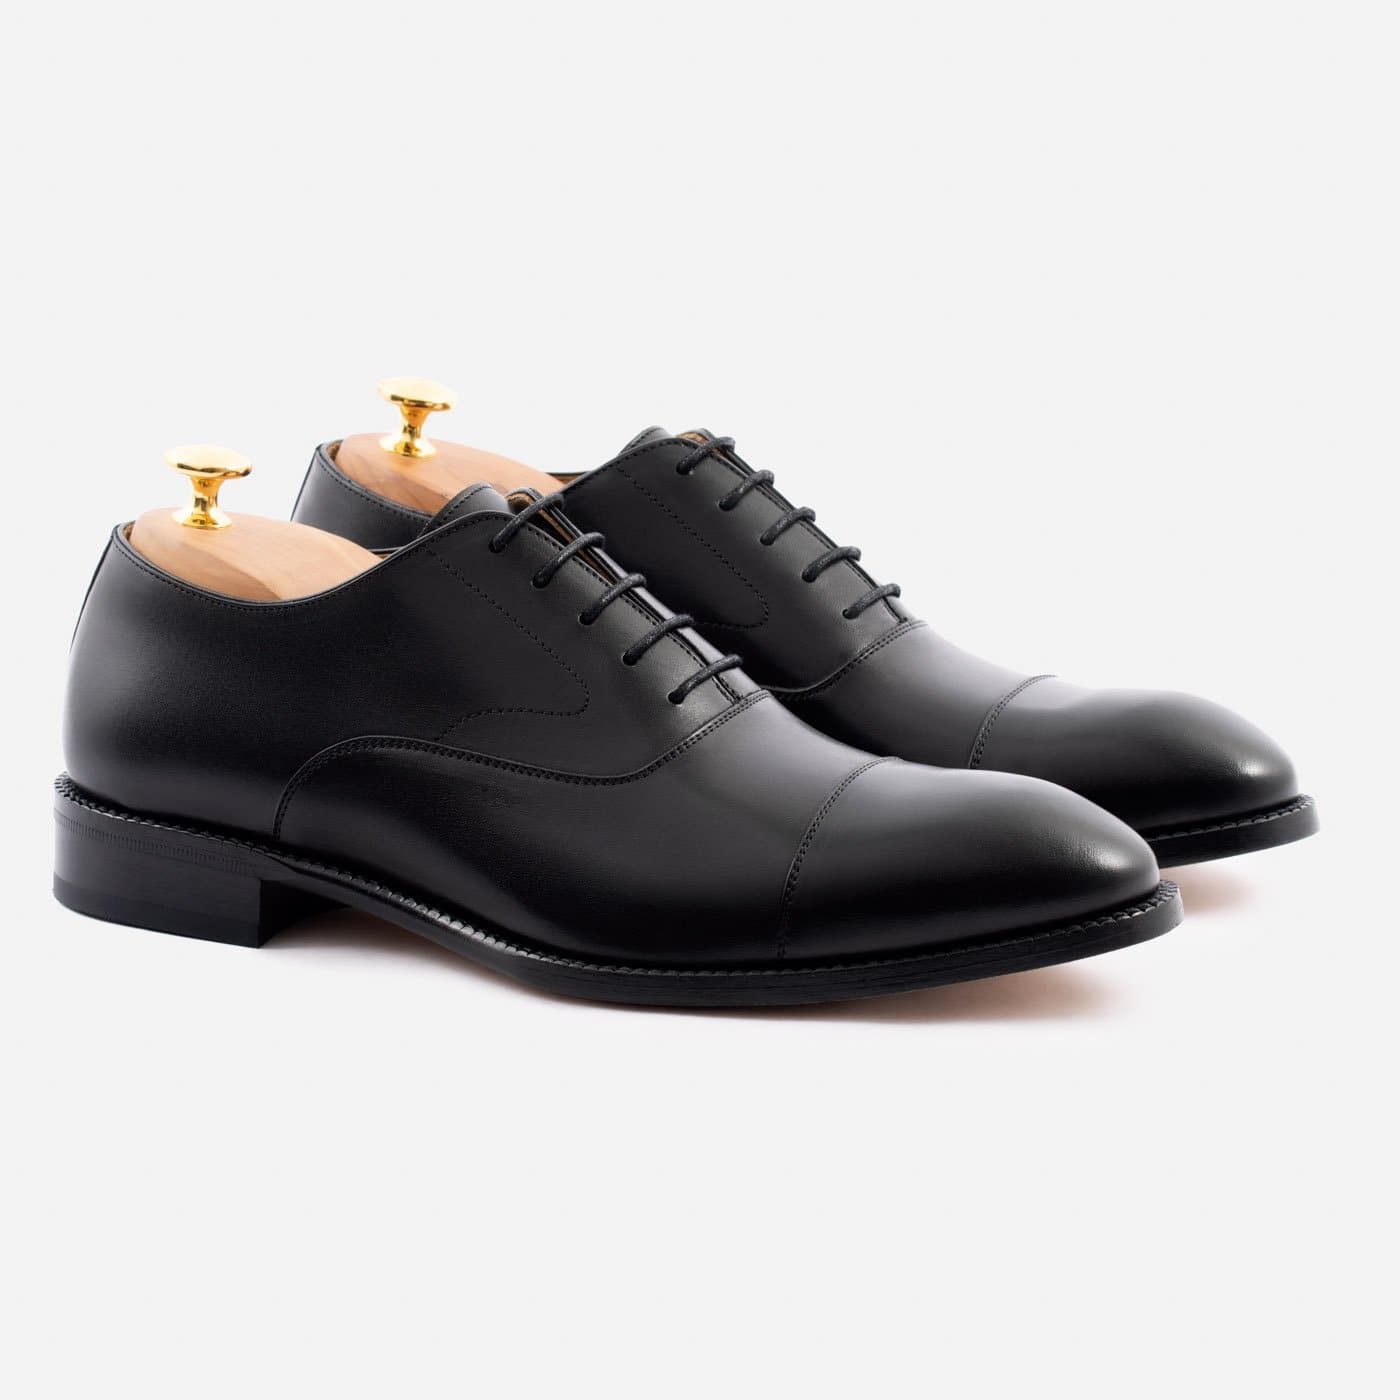 Business Setting with Black Oxfords